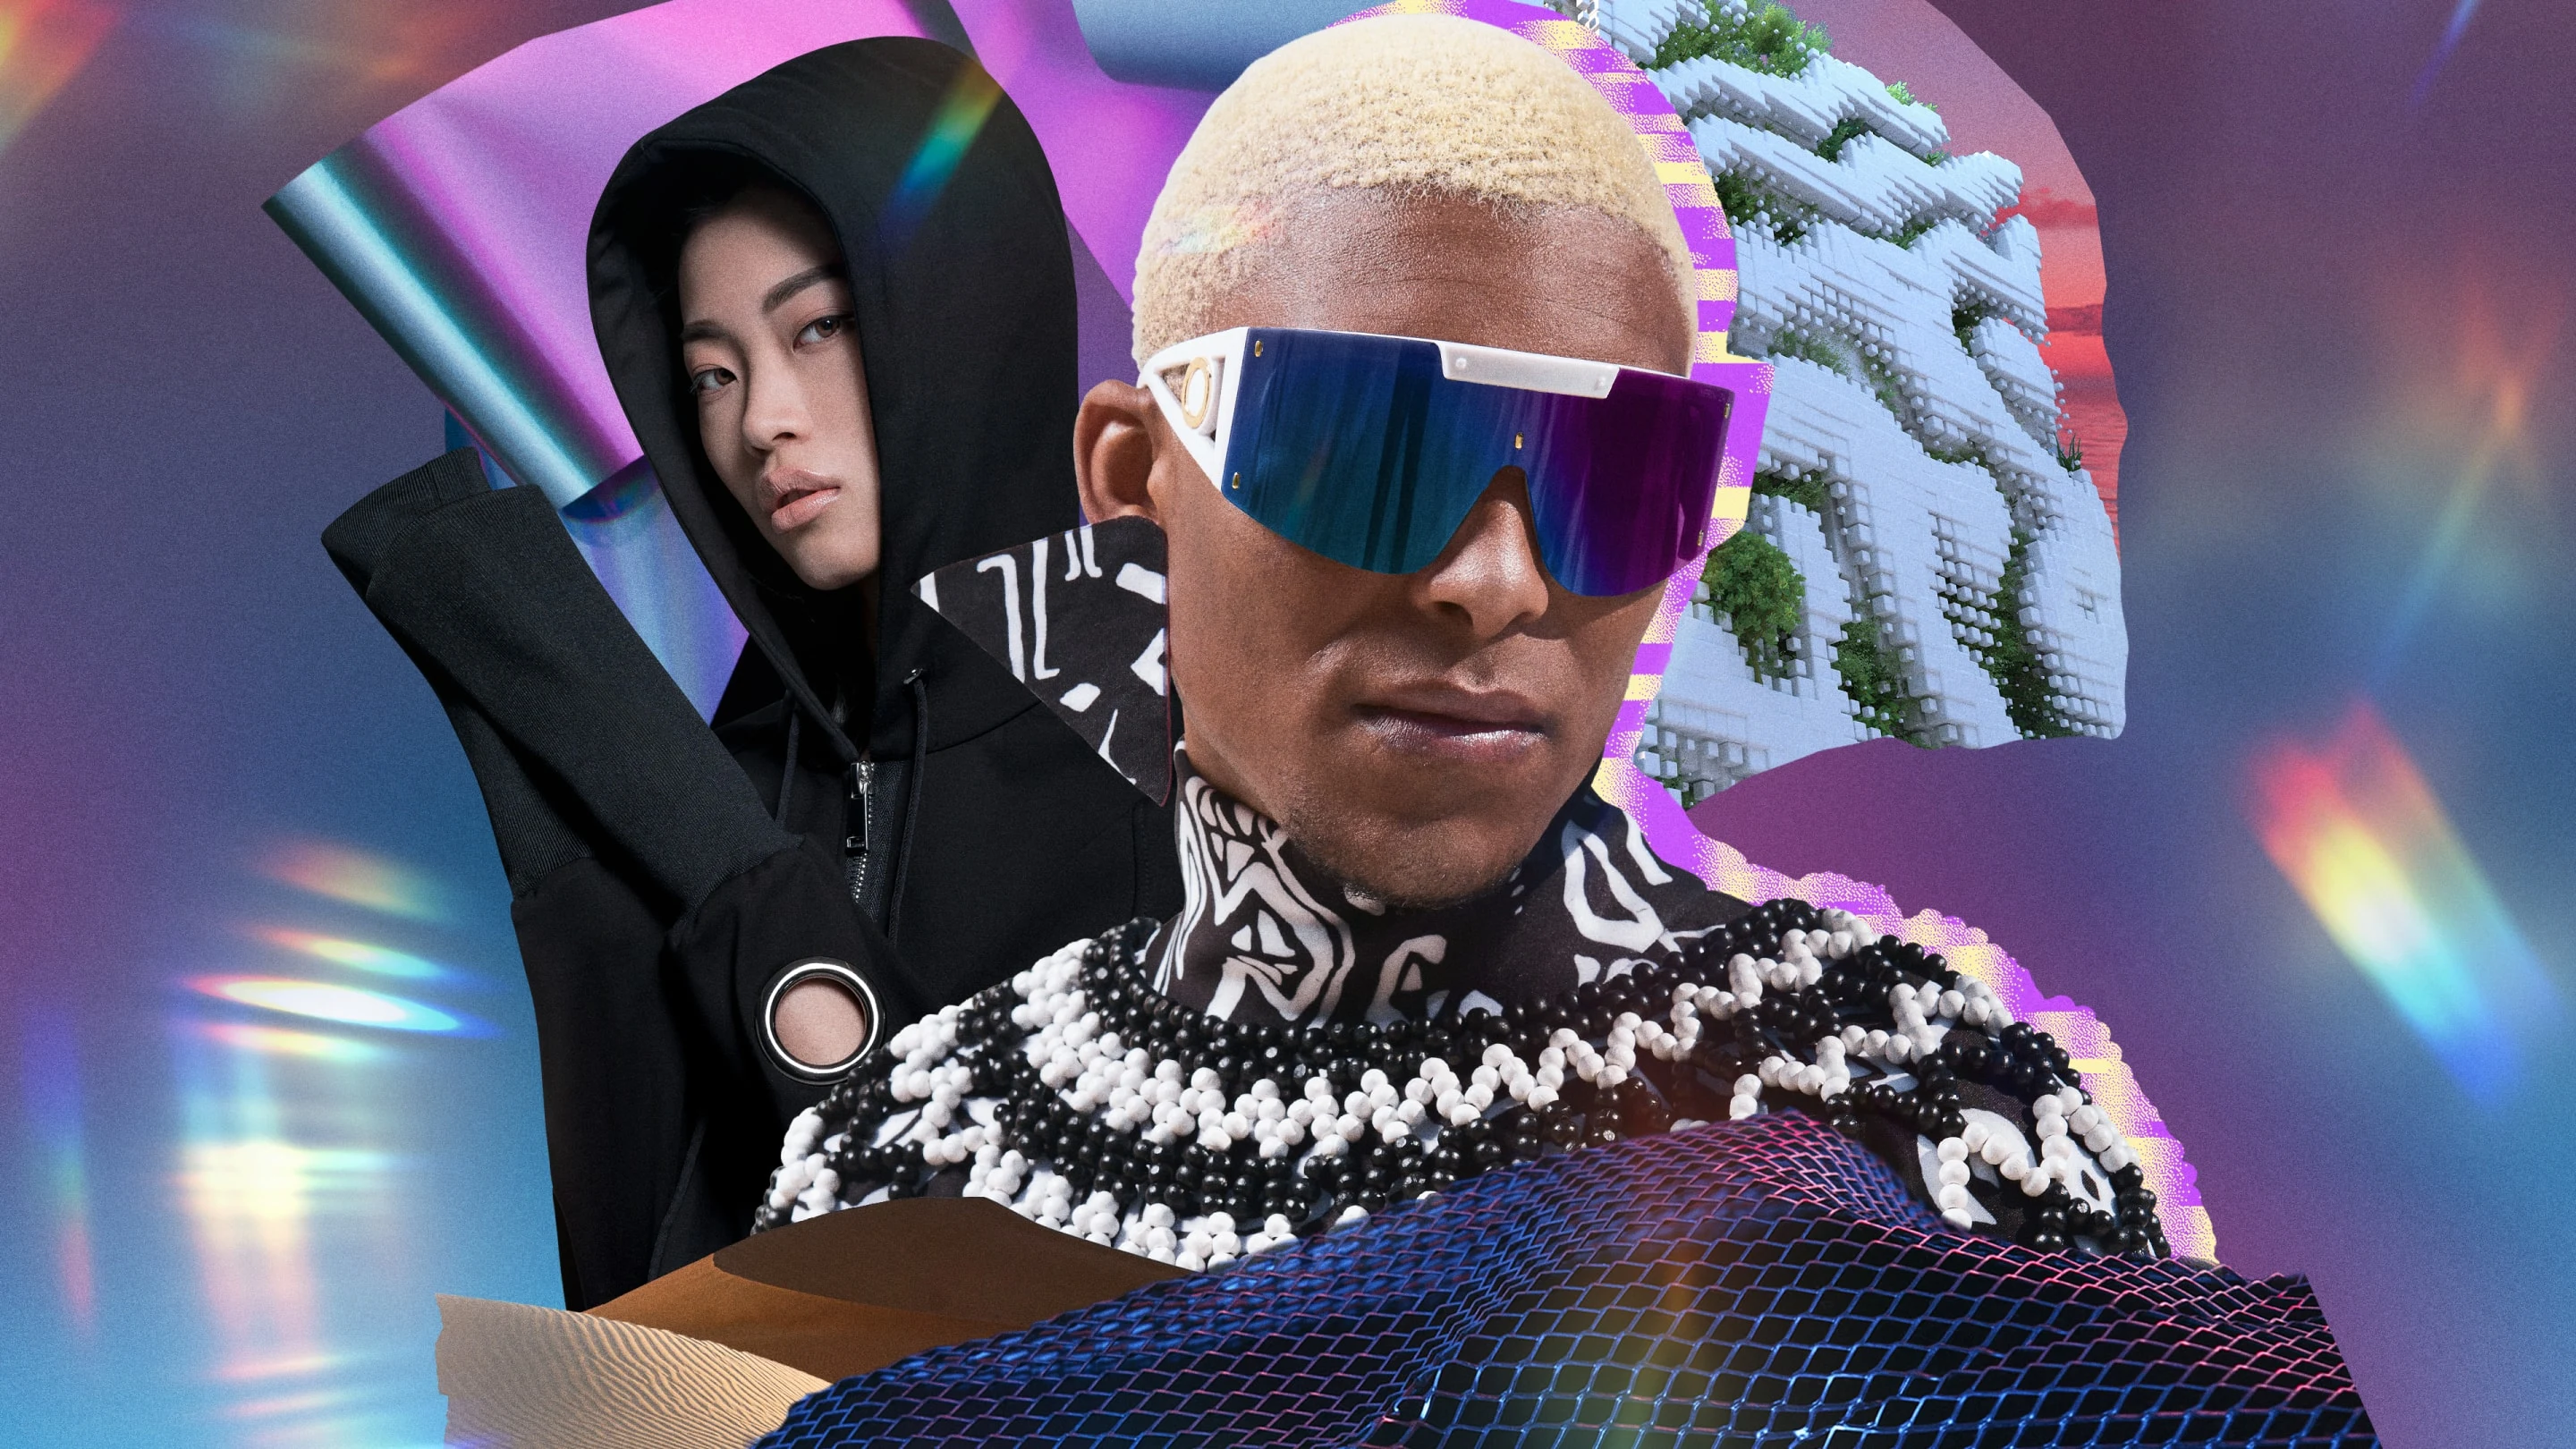 A future-forward collage featuring an Asian woman and a Black man wearing various interpretations of this galactic, dystopian style trend.